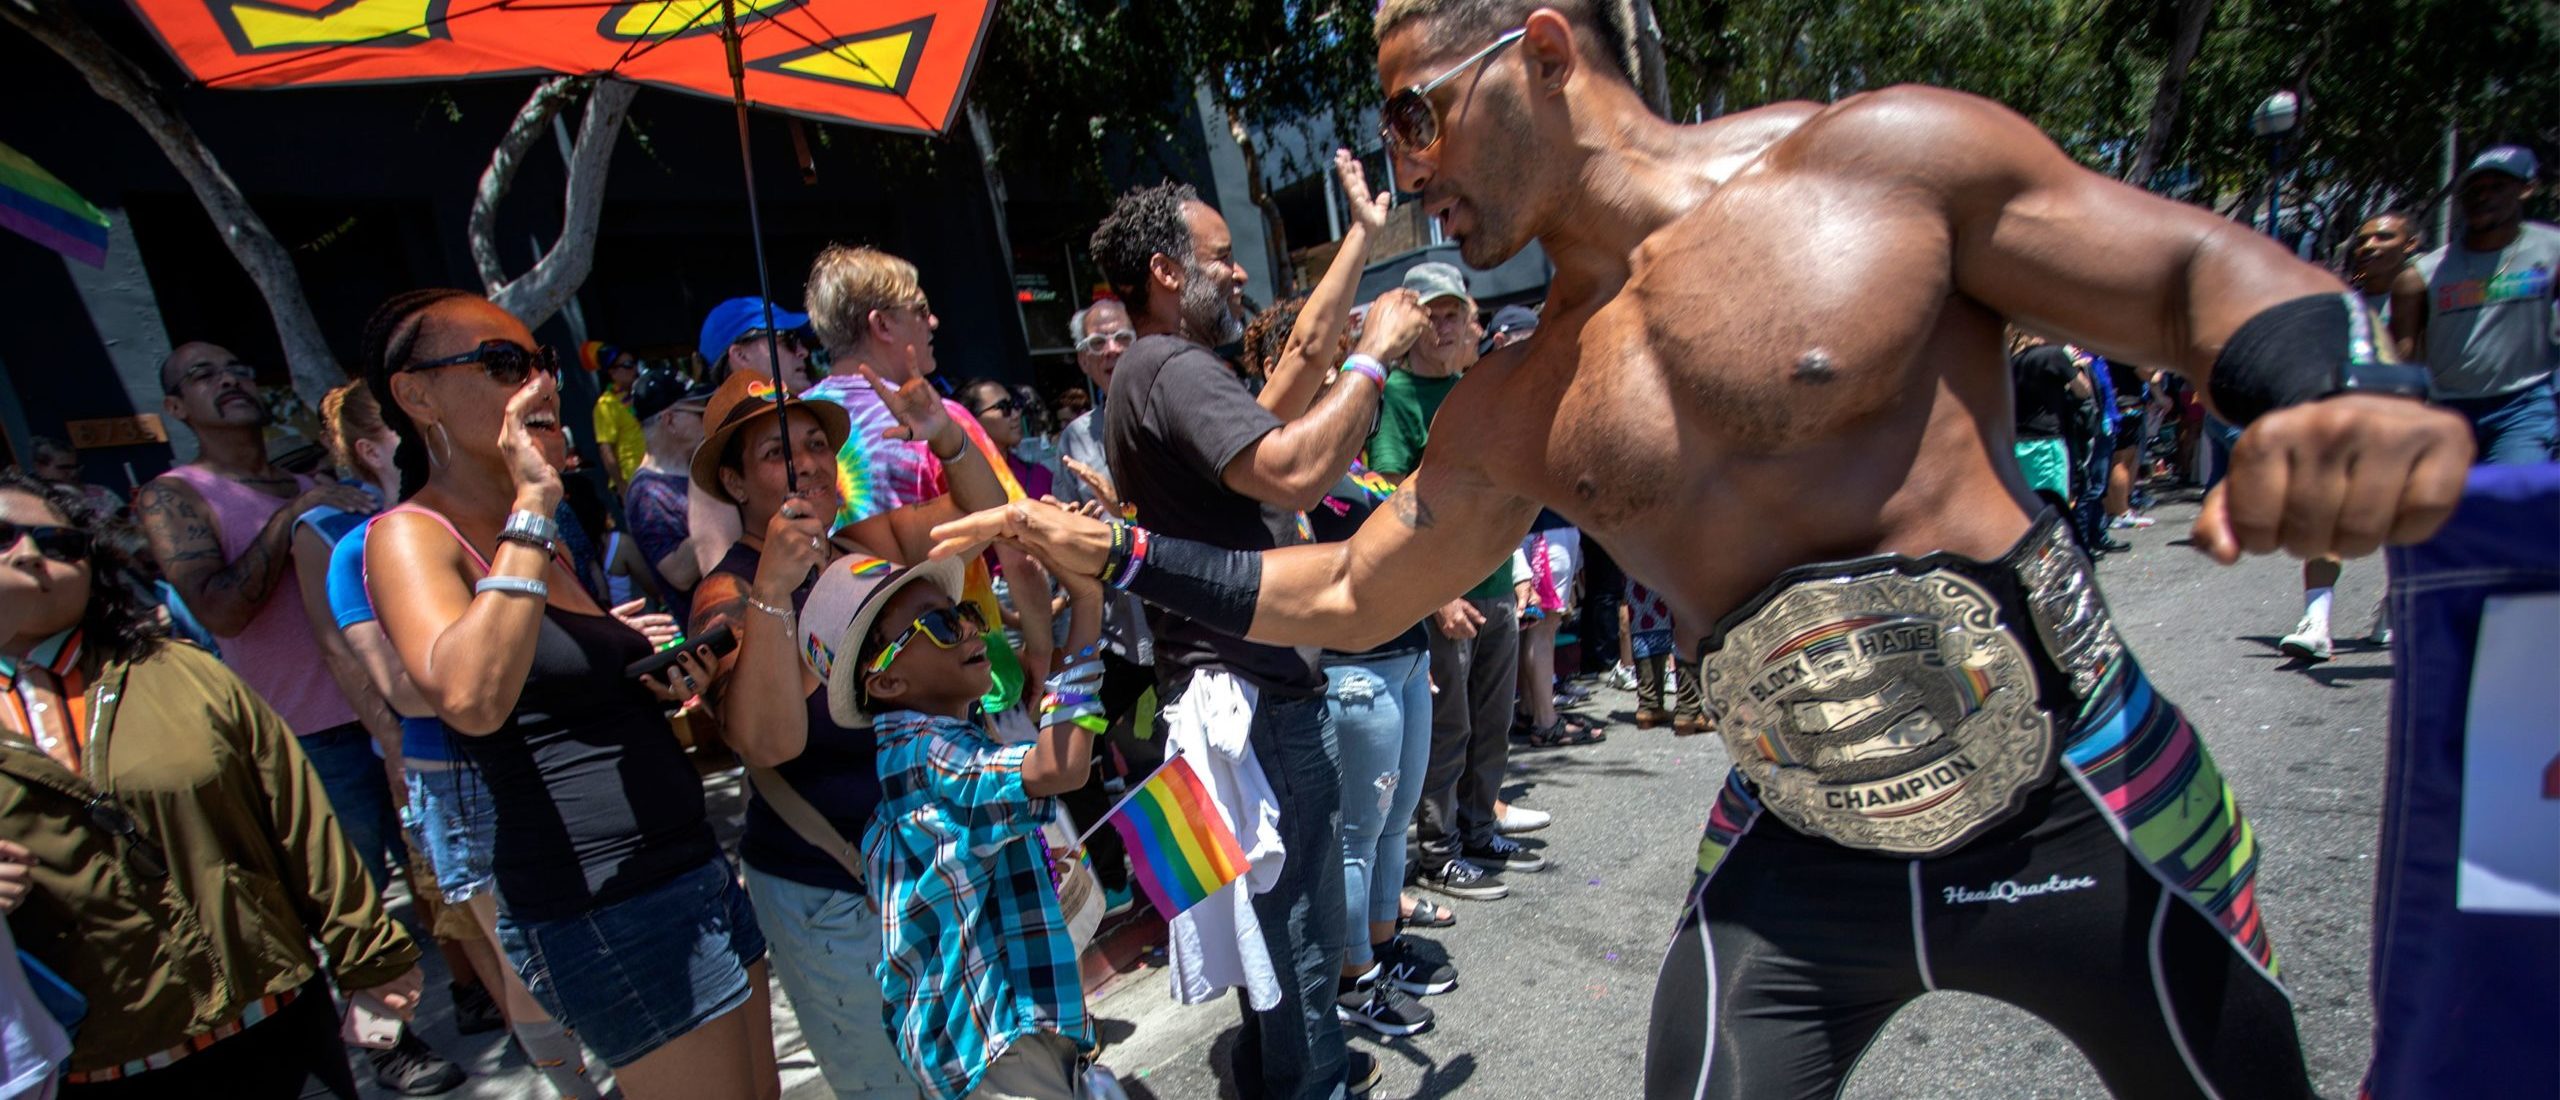 A boy is greeted by a participant during the annual LA Pride Parade in West Hollywood, California, on June 9, 2019. (DAVID MCNEW/AFP via Getty Images)